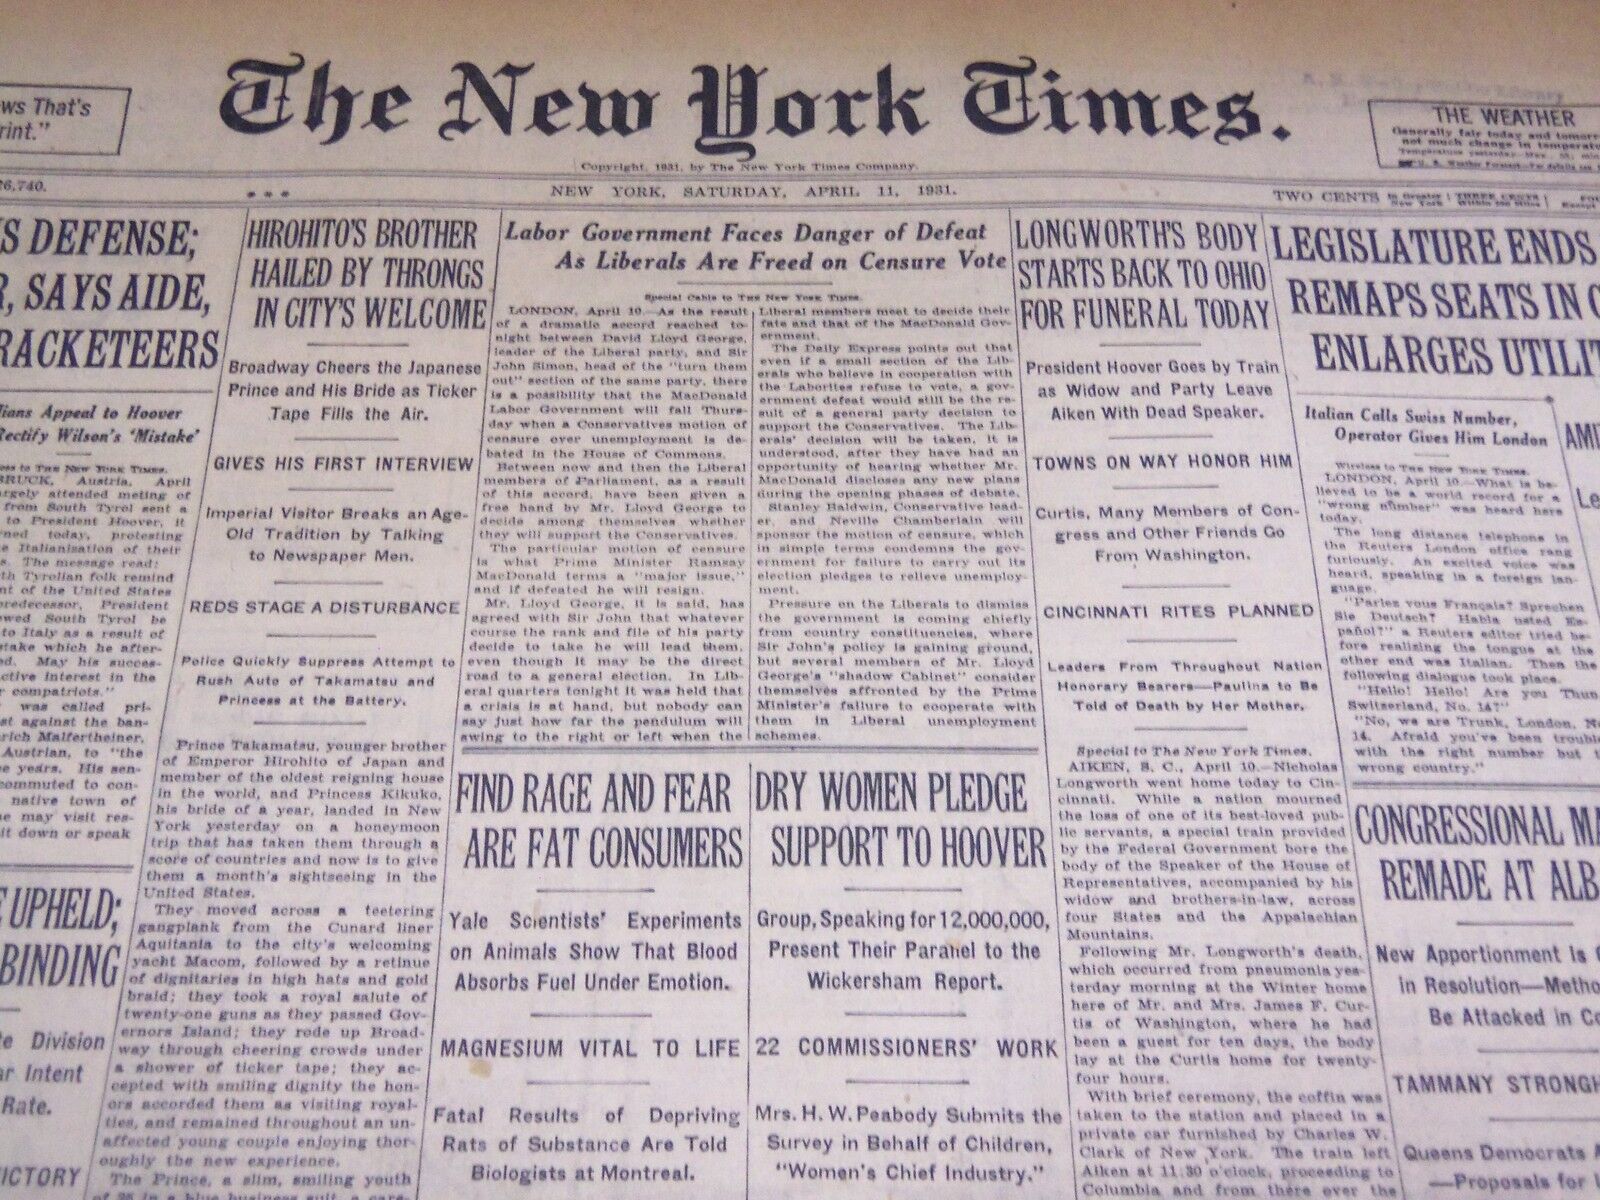 1931 APRIL 11 NEW YORK TIMES - DRY WOMEN PLEDGE SUPPORT TO HOOVER - NT 2222